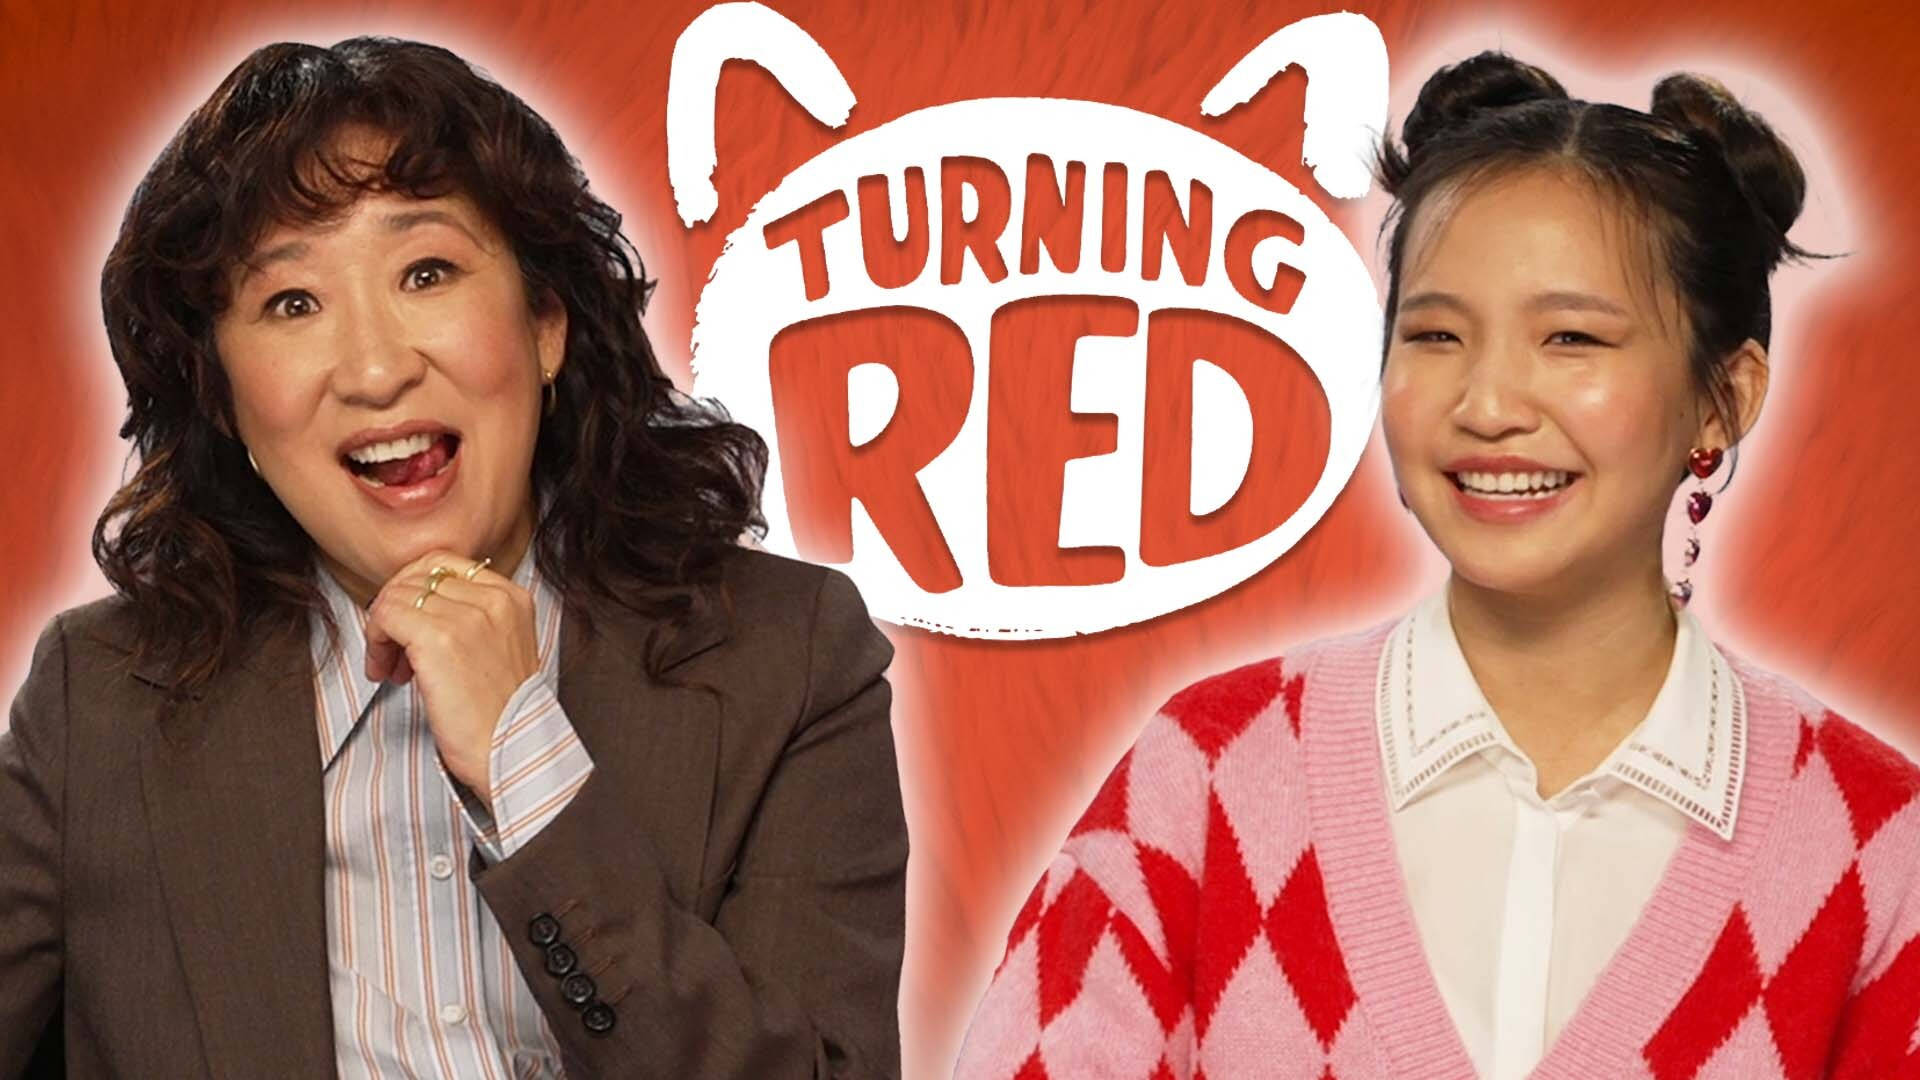 Turning Red 2: Will there be a Turning Red sequel? - PopBuzz